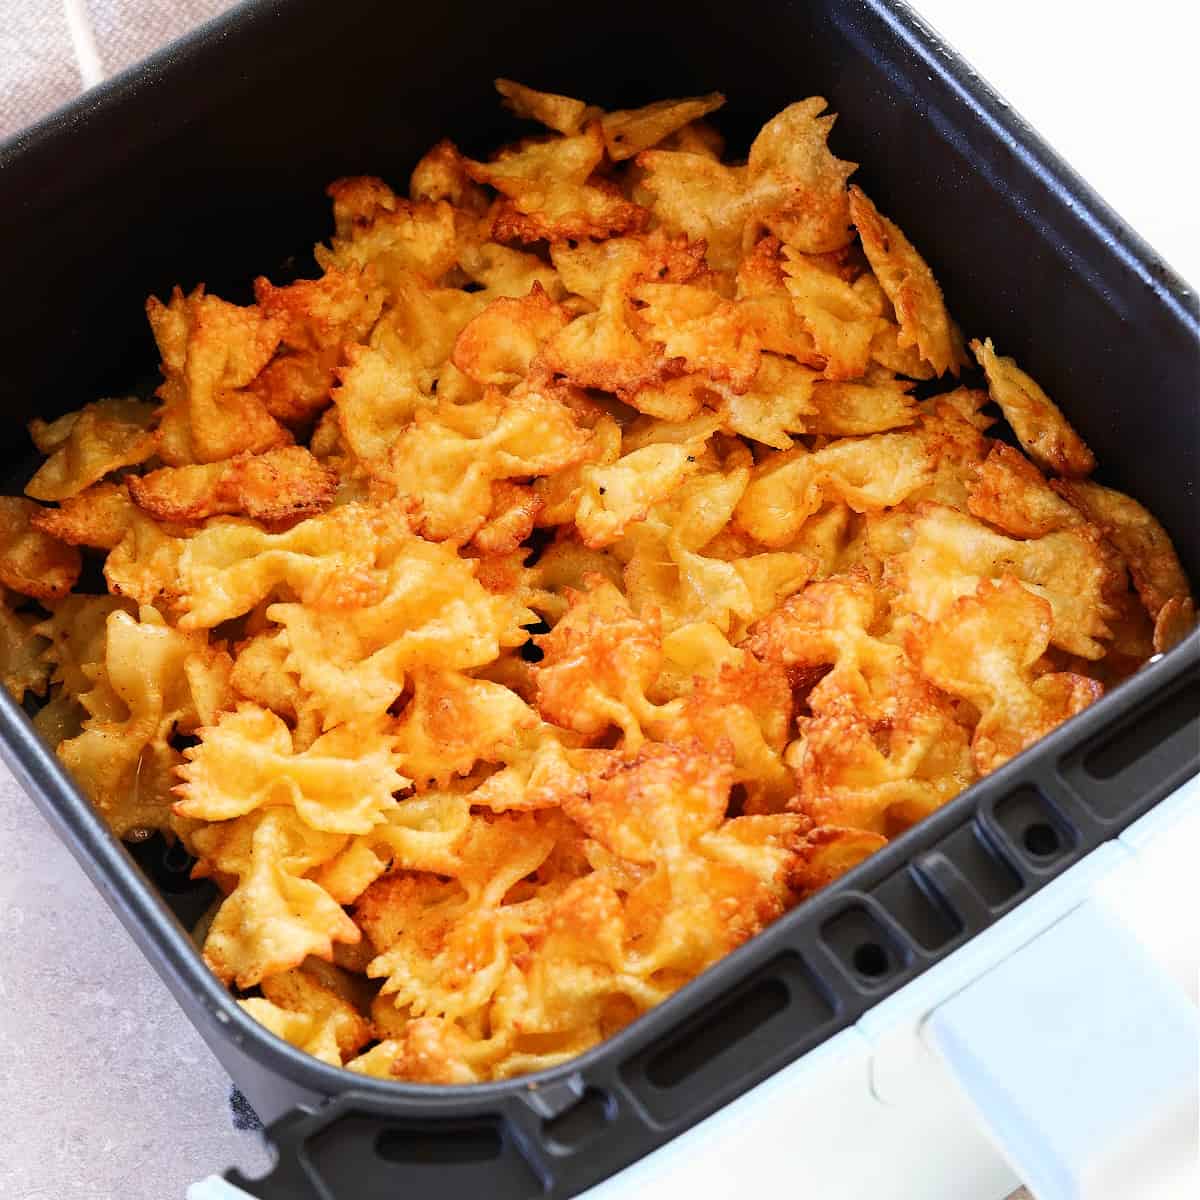 Crispy pasta chips in the air fryer.